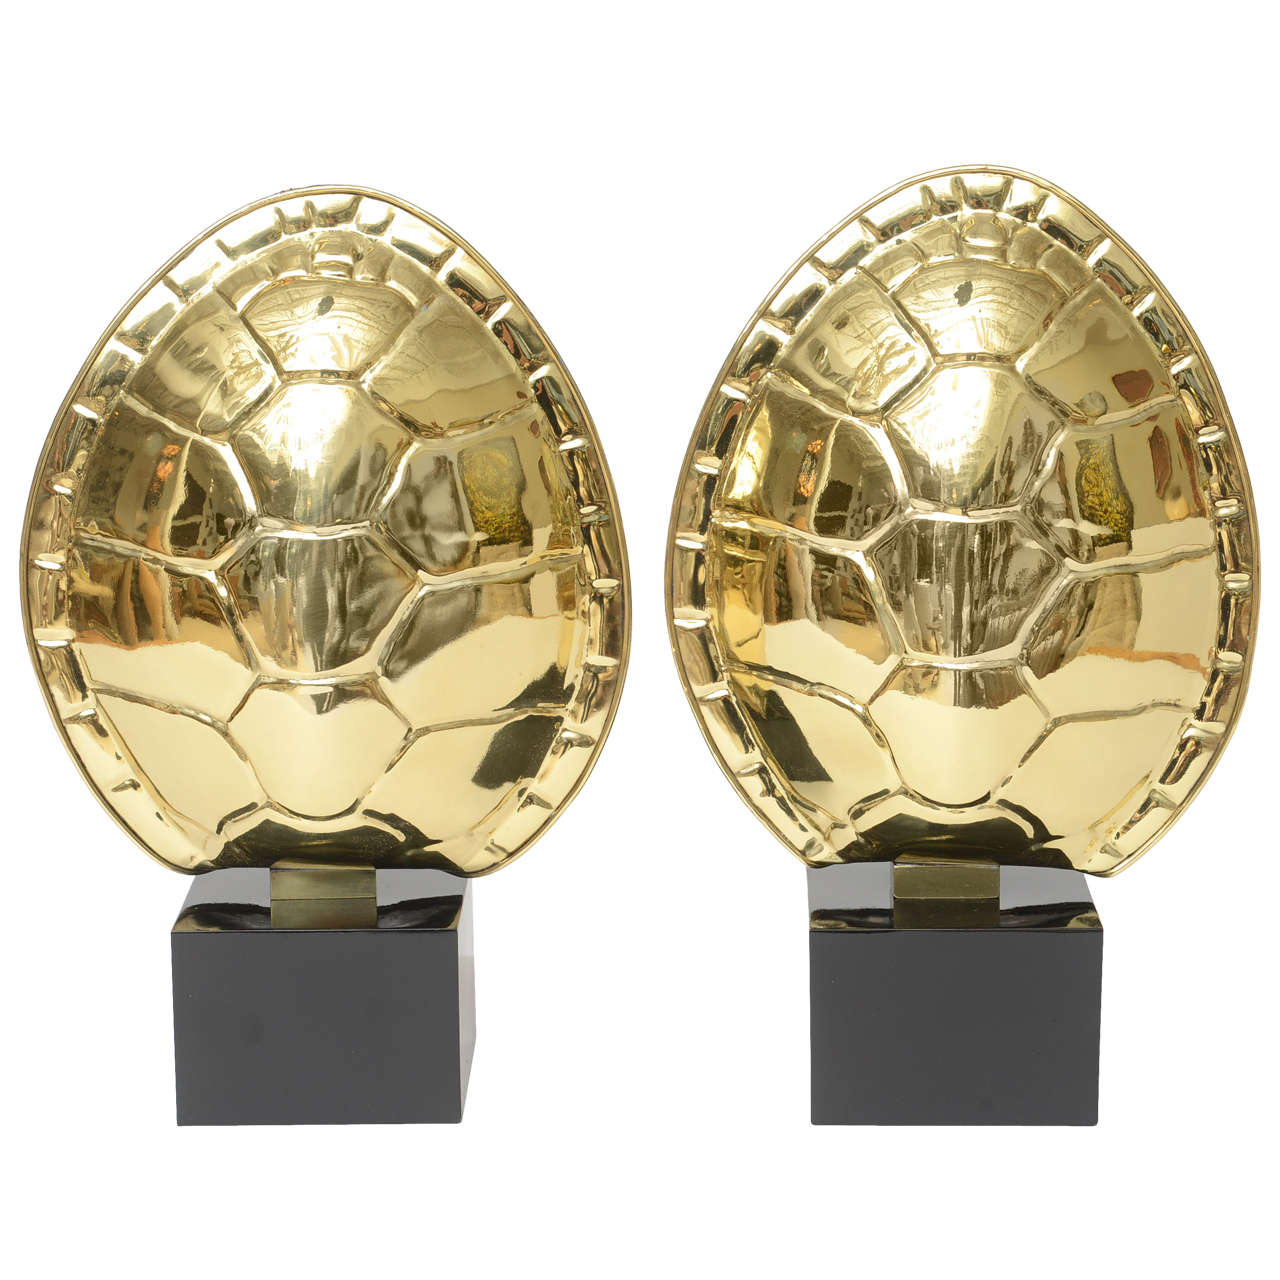 Pair of Fully Restored Chapman Polished Brass Tortoise Shell Lamps